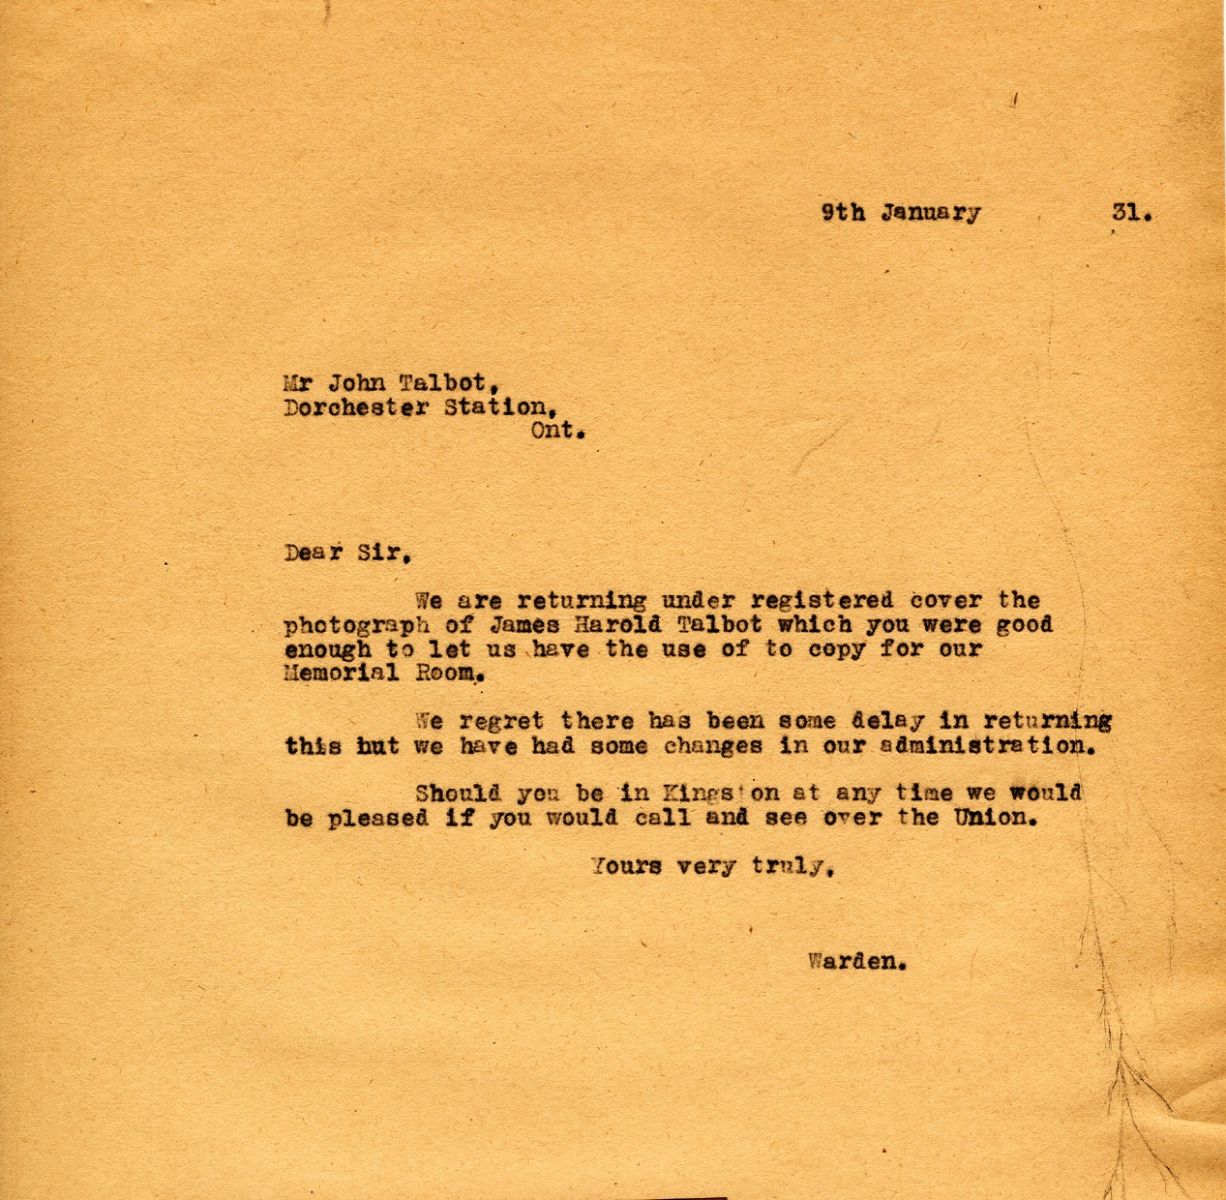 Letter from the Warden to Mr. John Talbot, 9th February 1931